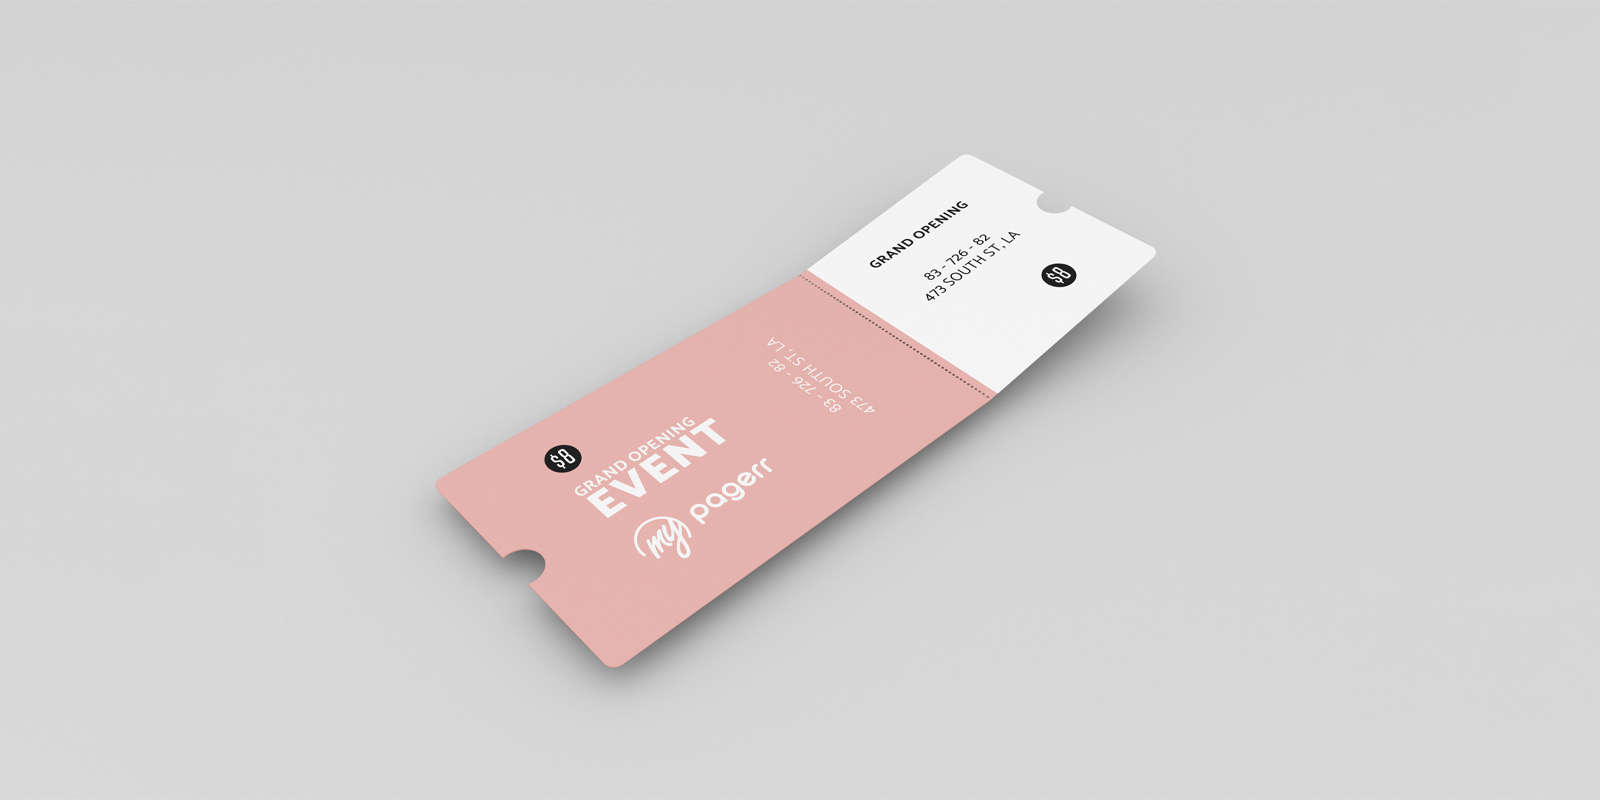 Tickets in Bucharest - Print with Pagerr